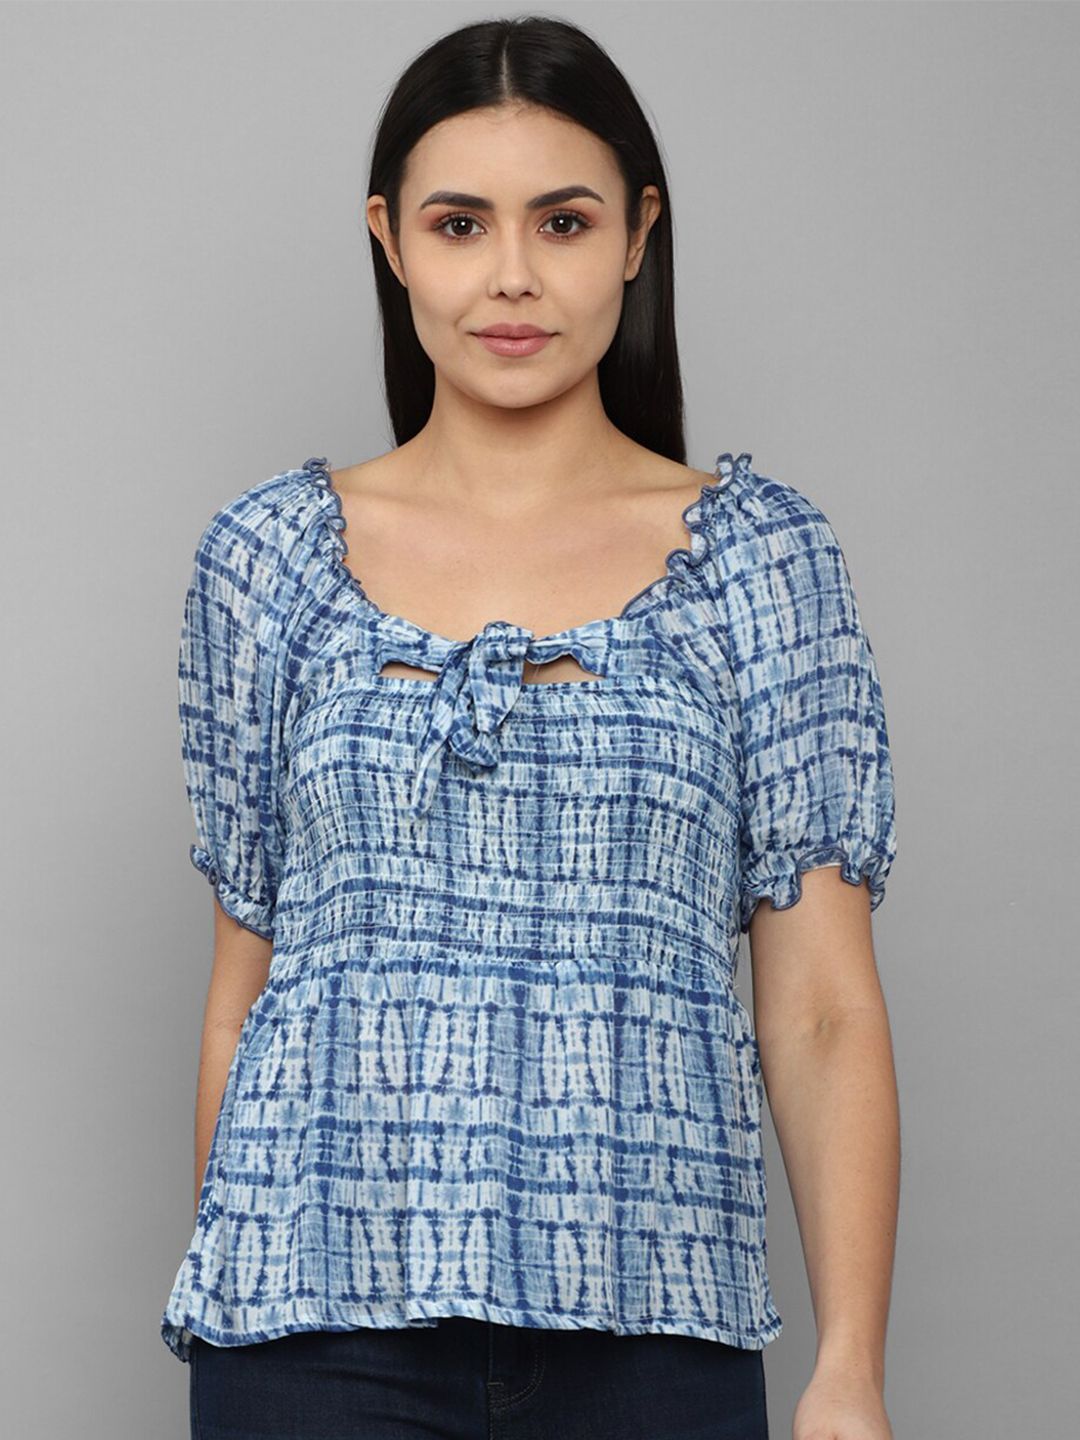 Allen Solly Woman Blue Tie and Dye Top Price in India